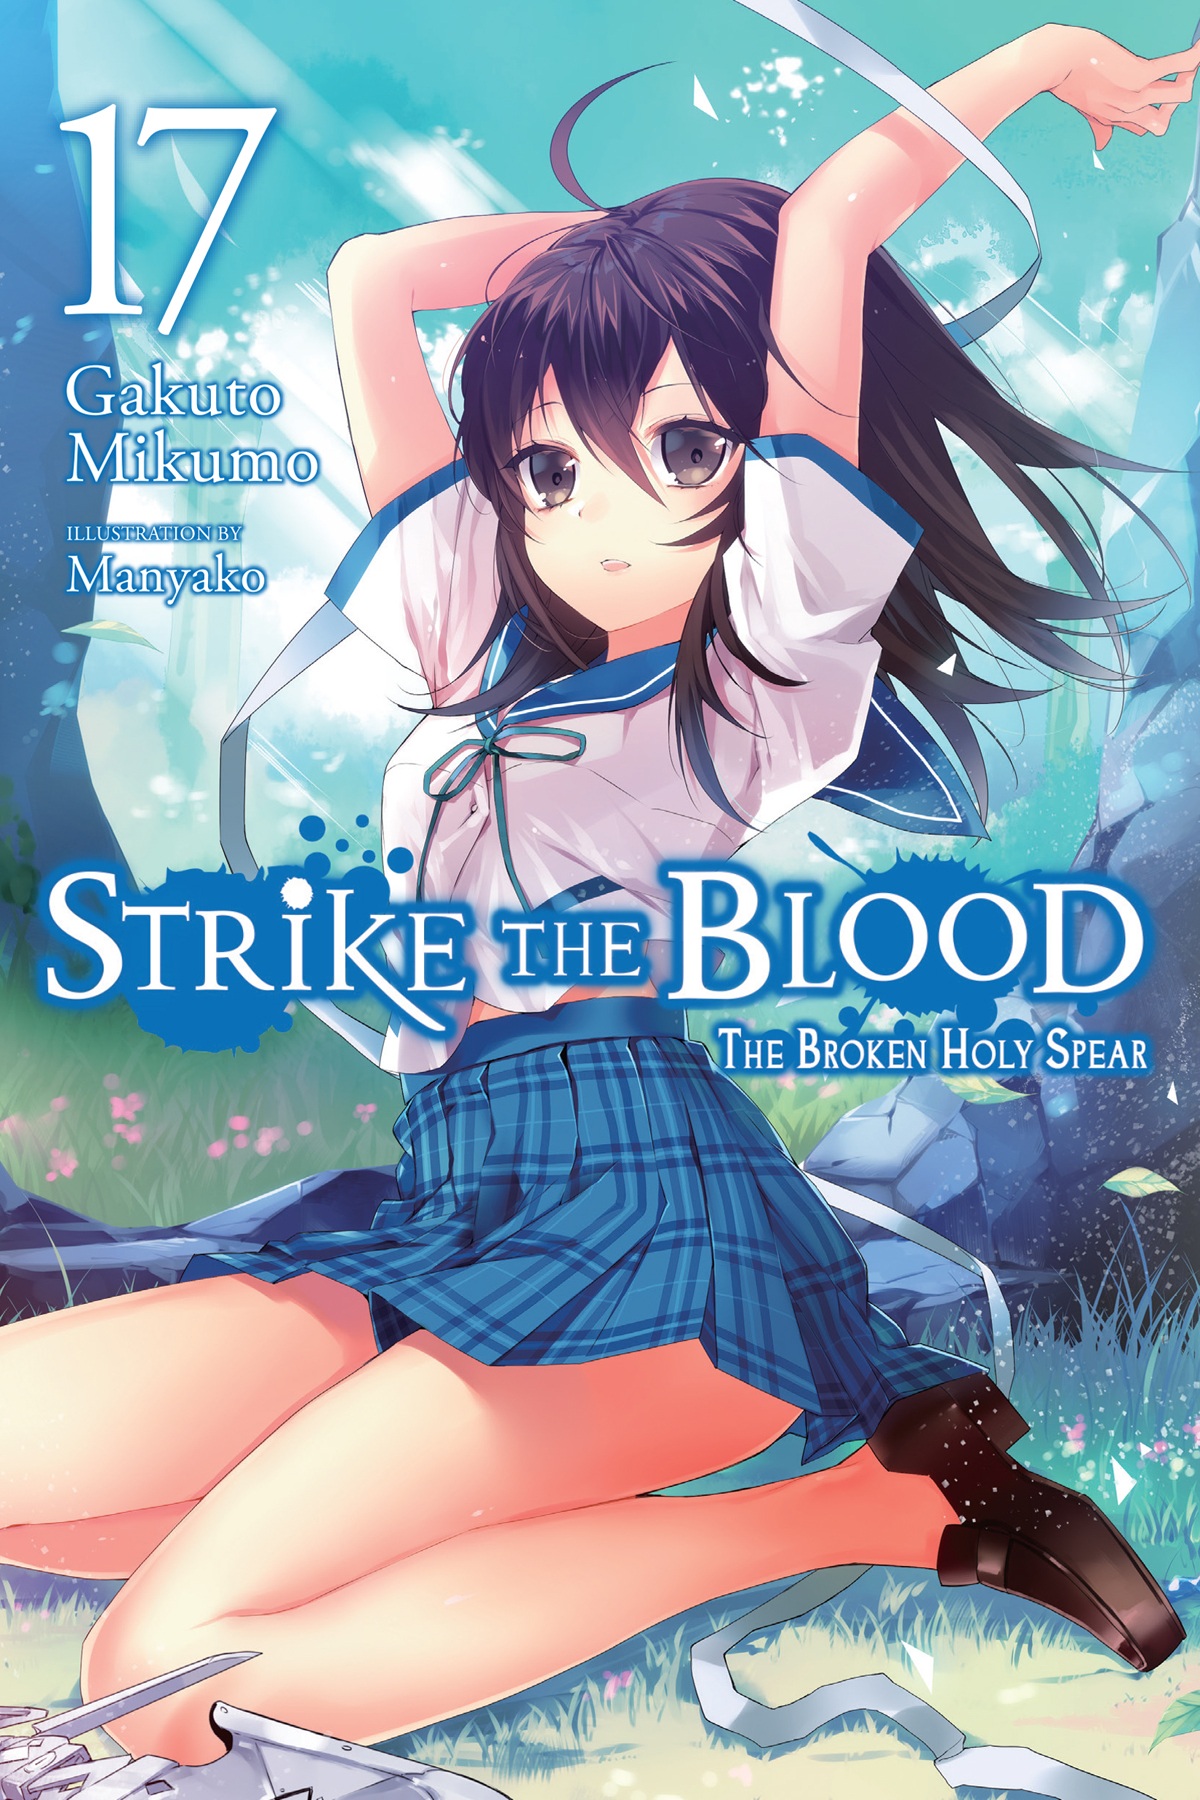 Read Strike The Blood Vol.1 Chapter 1 : The Fourth Primogenitor on